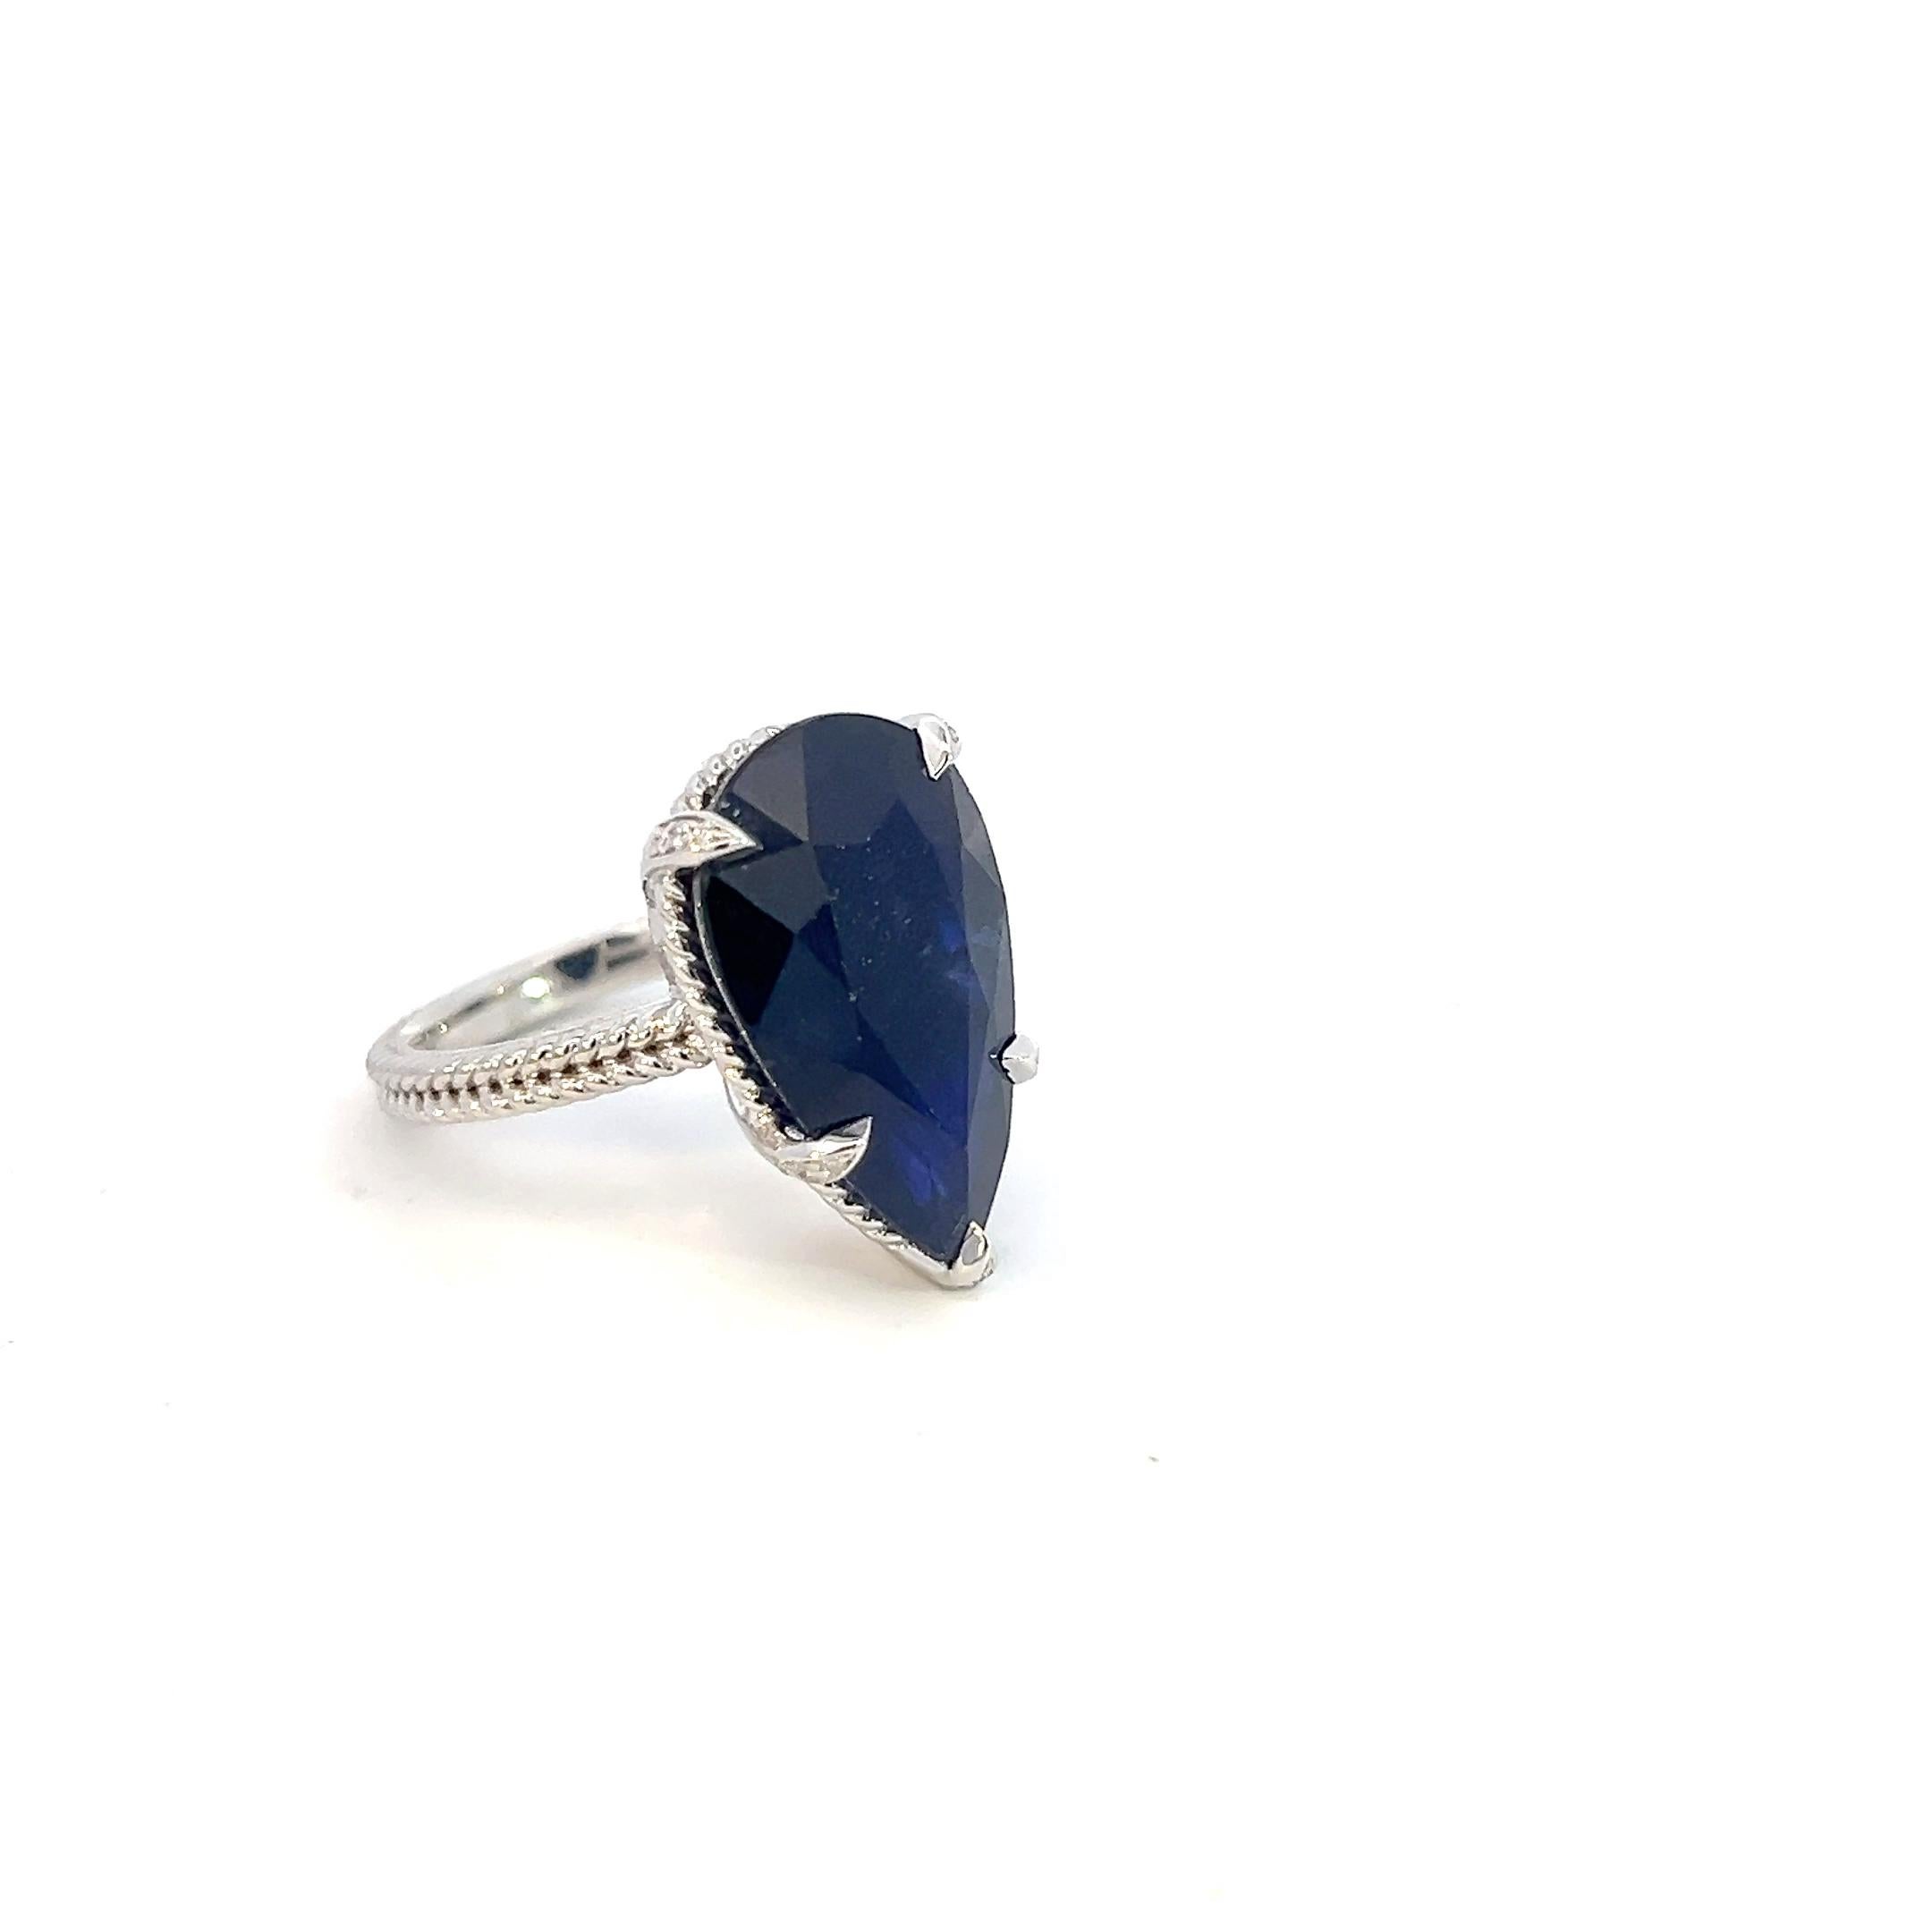 Natural Solitaire Sapphire Ring 6.5 14k W Gold 15.2 TCW Certified 10